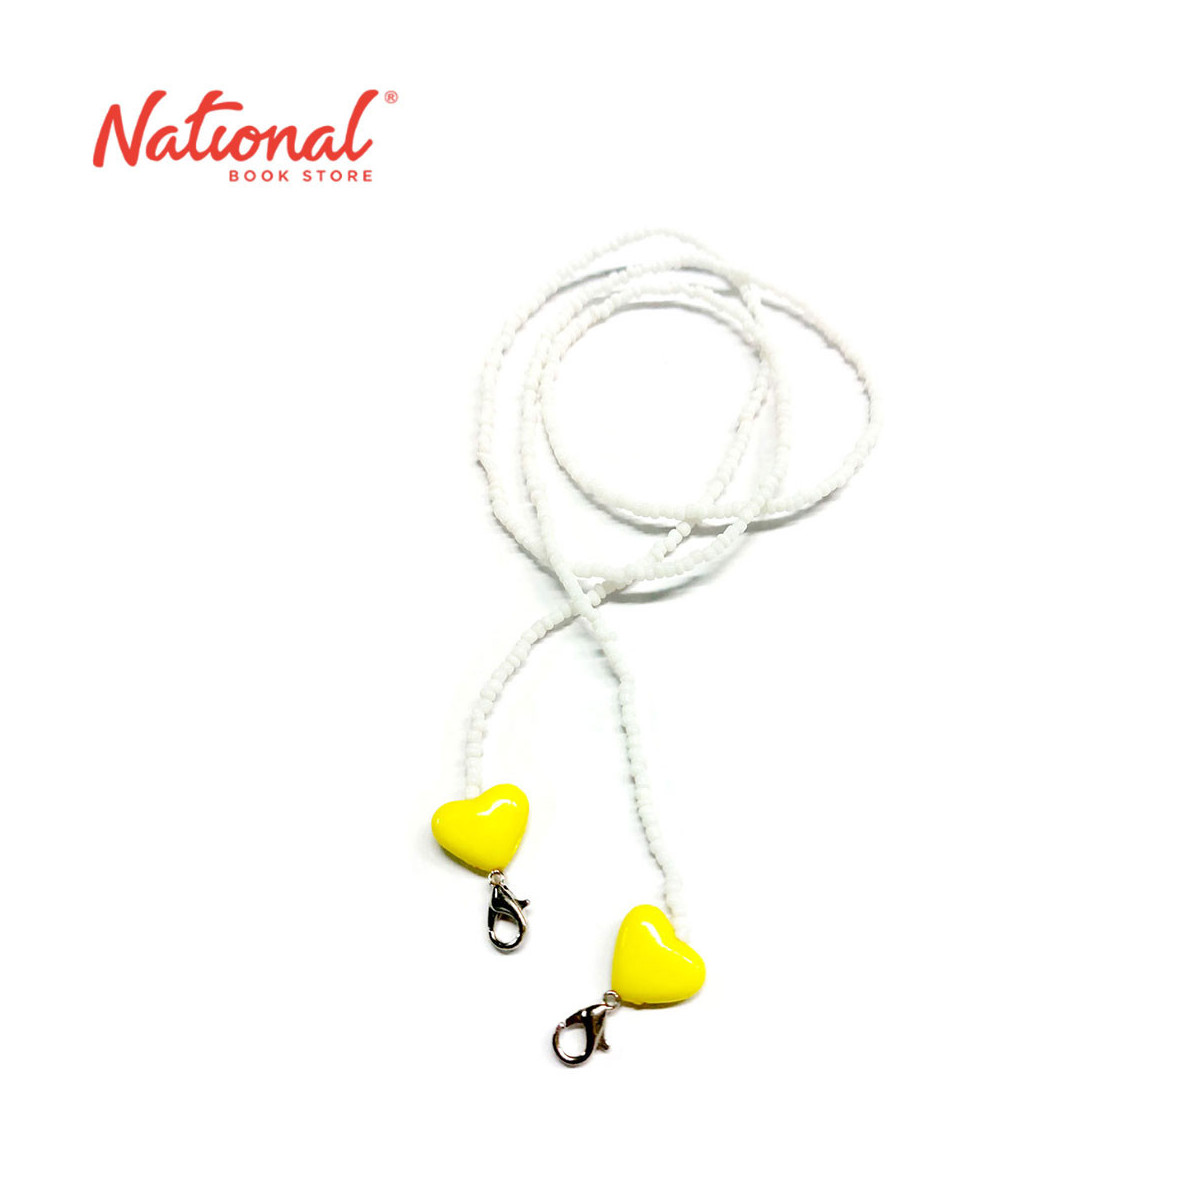 Face Mask Lanyard White Beads Yellow with Heart - Medical Supplies